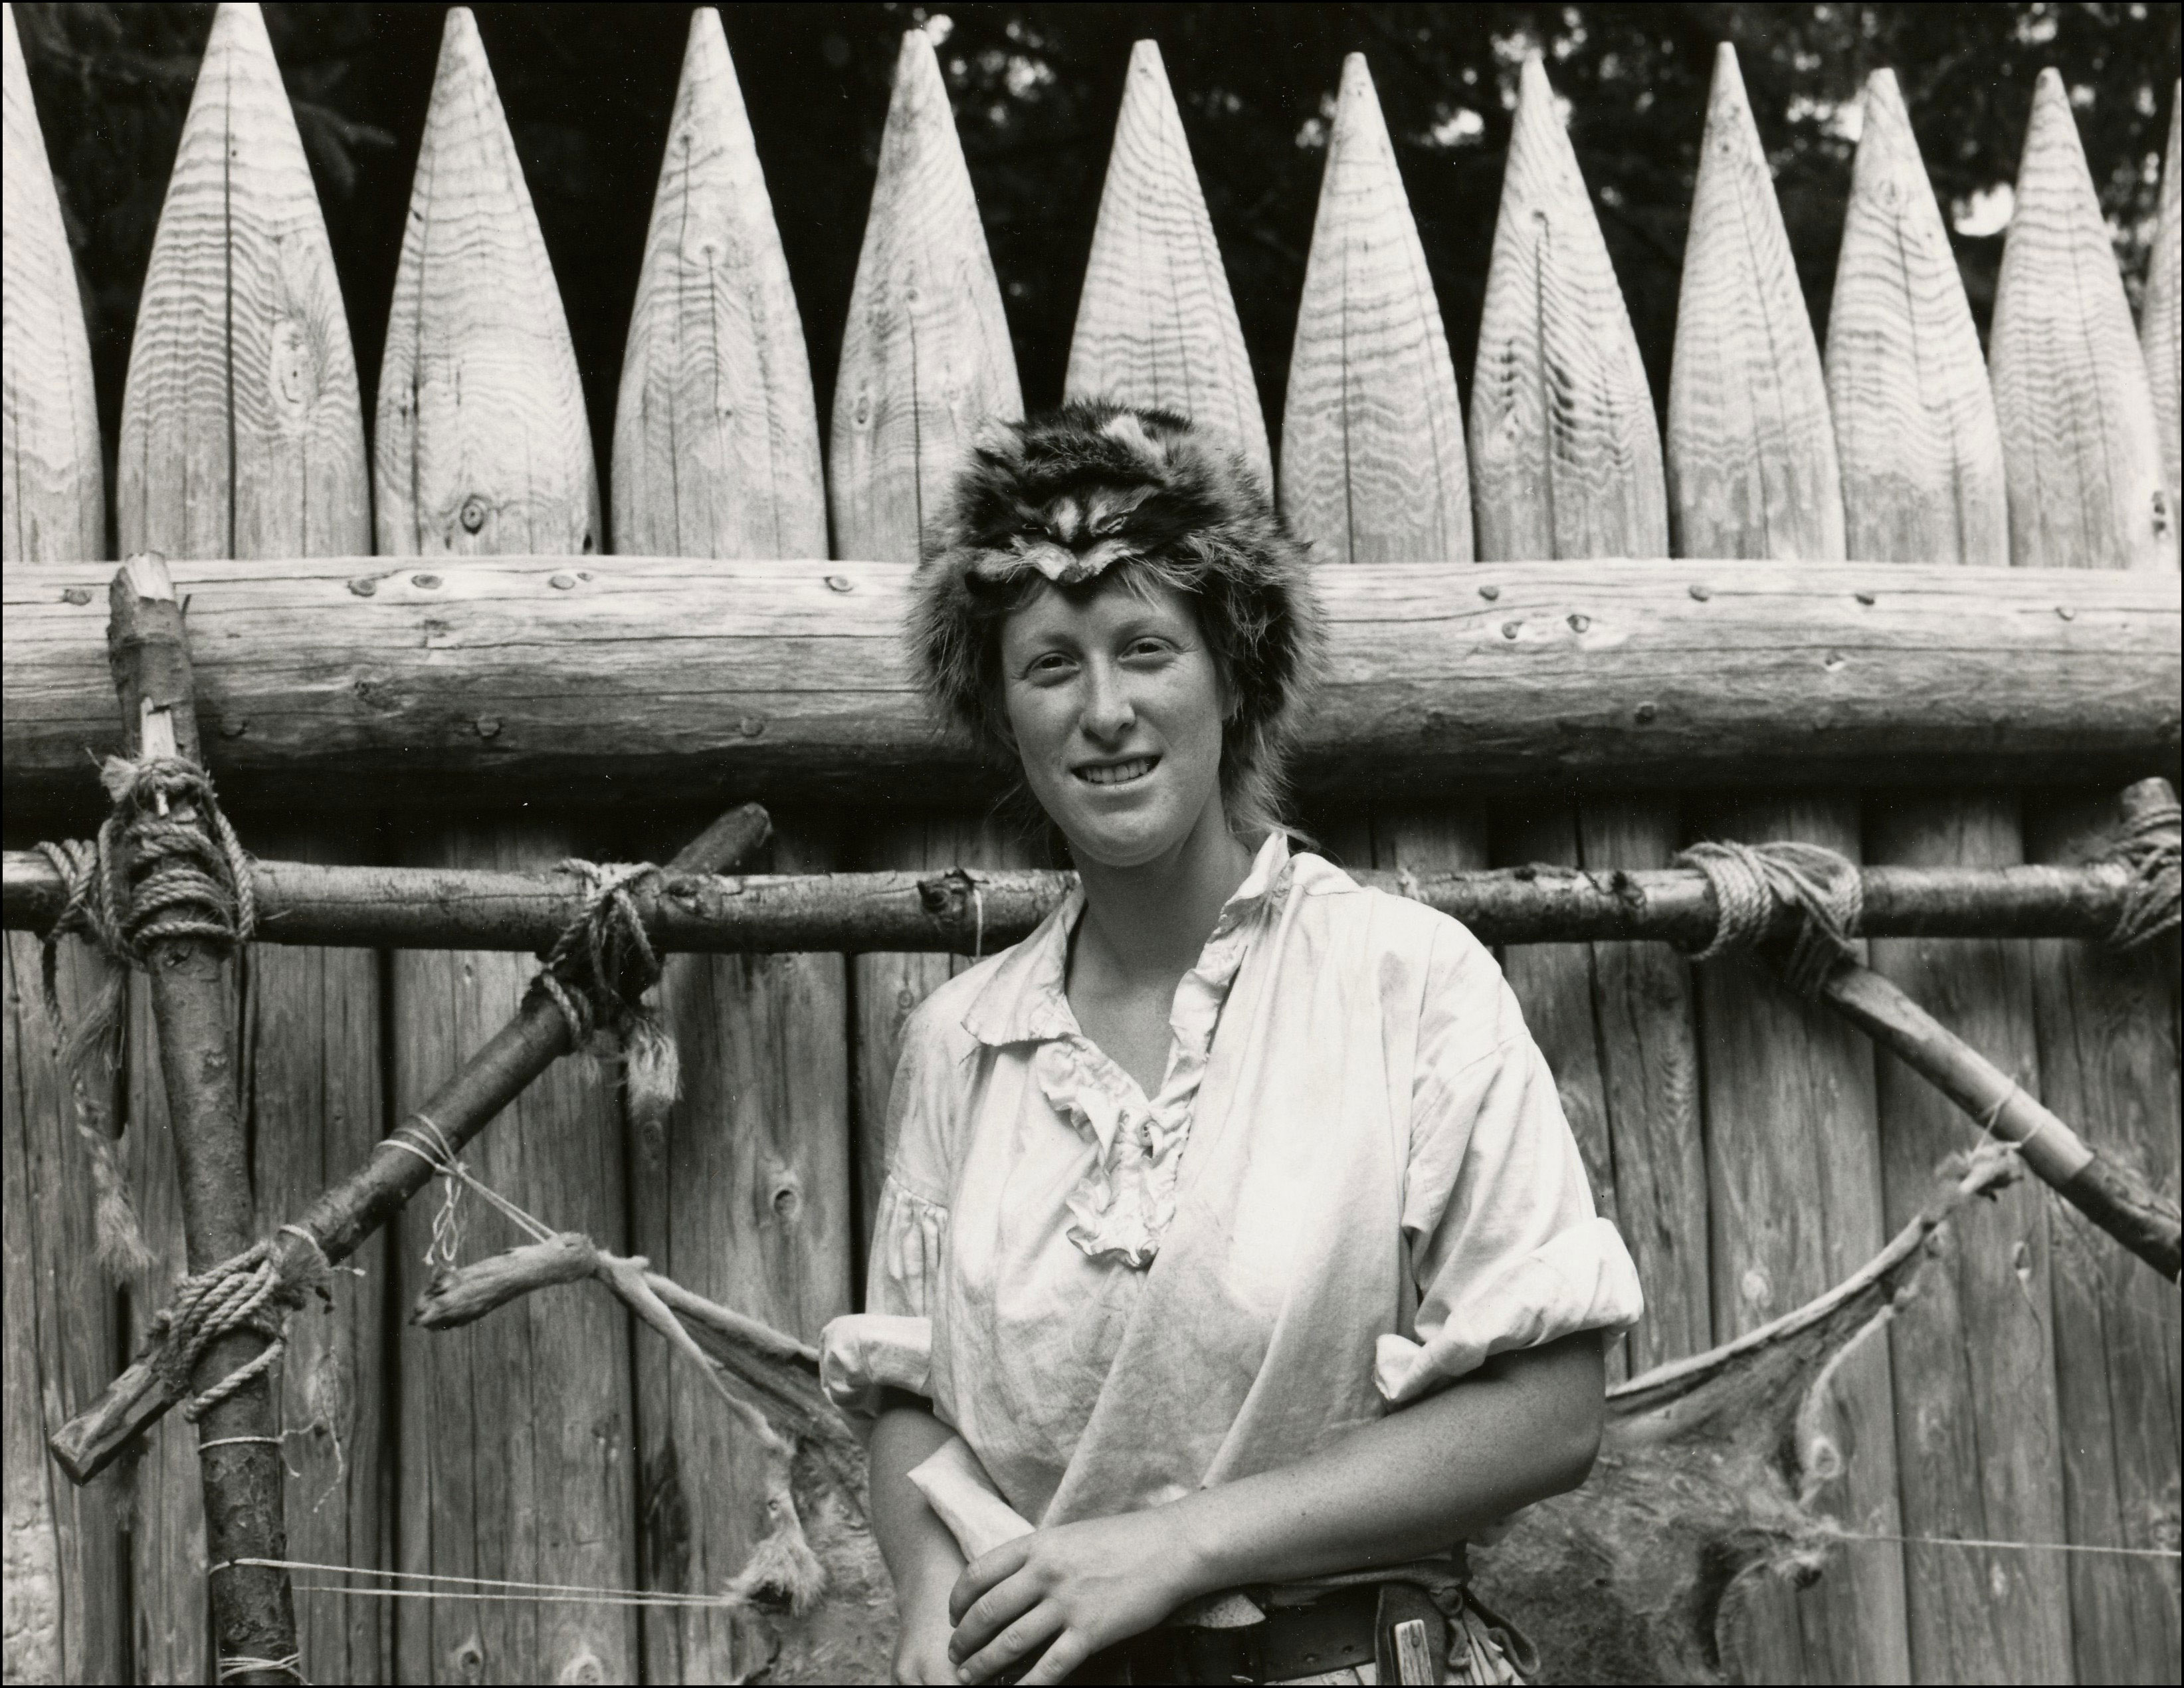 Woman with coon cap and mountain-main attire standing in front of an old fort type fence. Hide if an animal is stretched out to dry behind her.